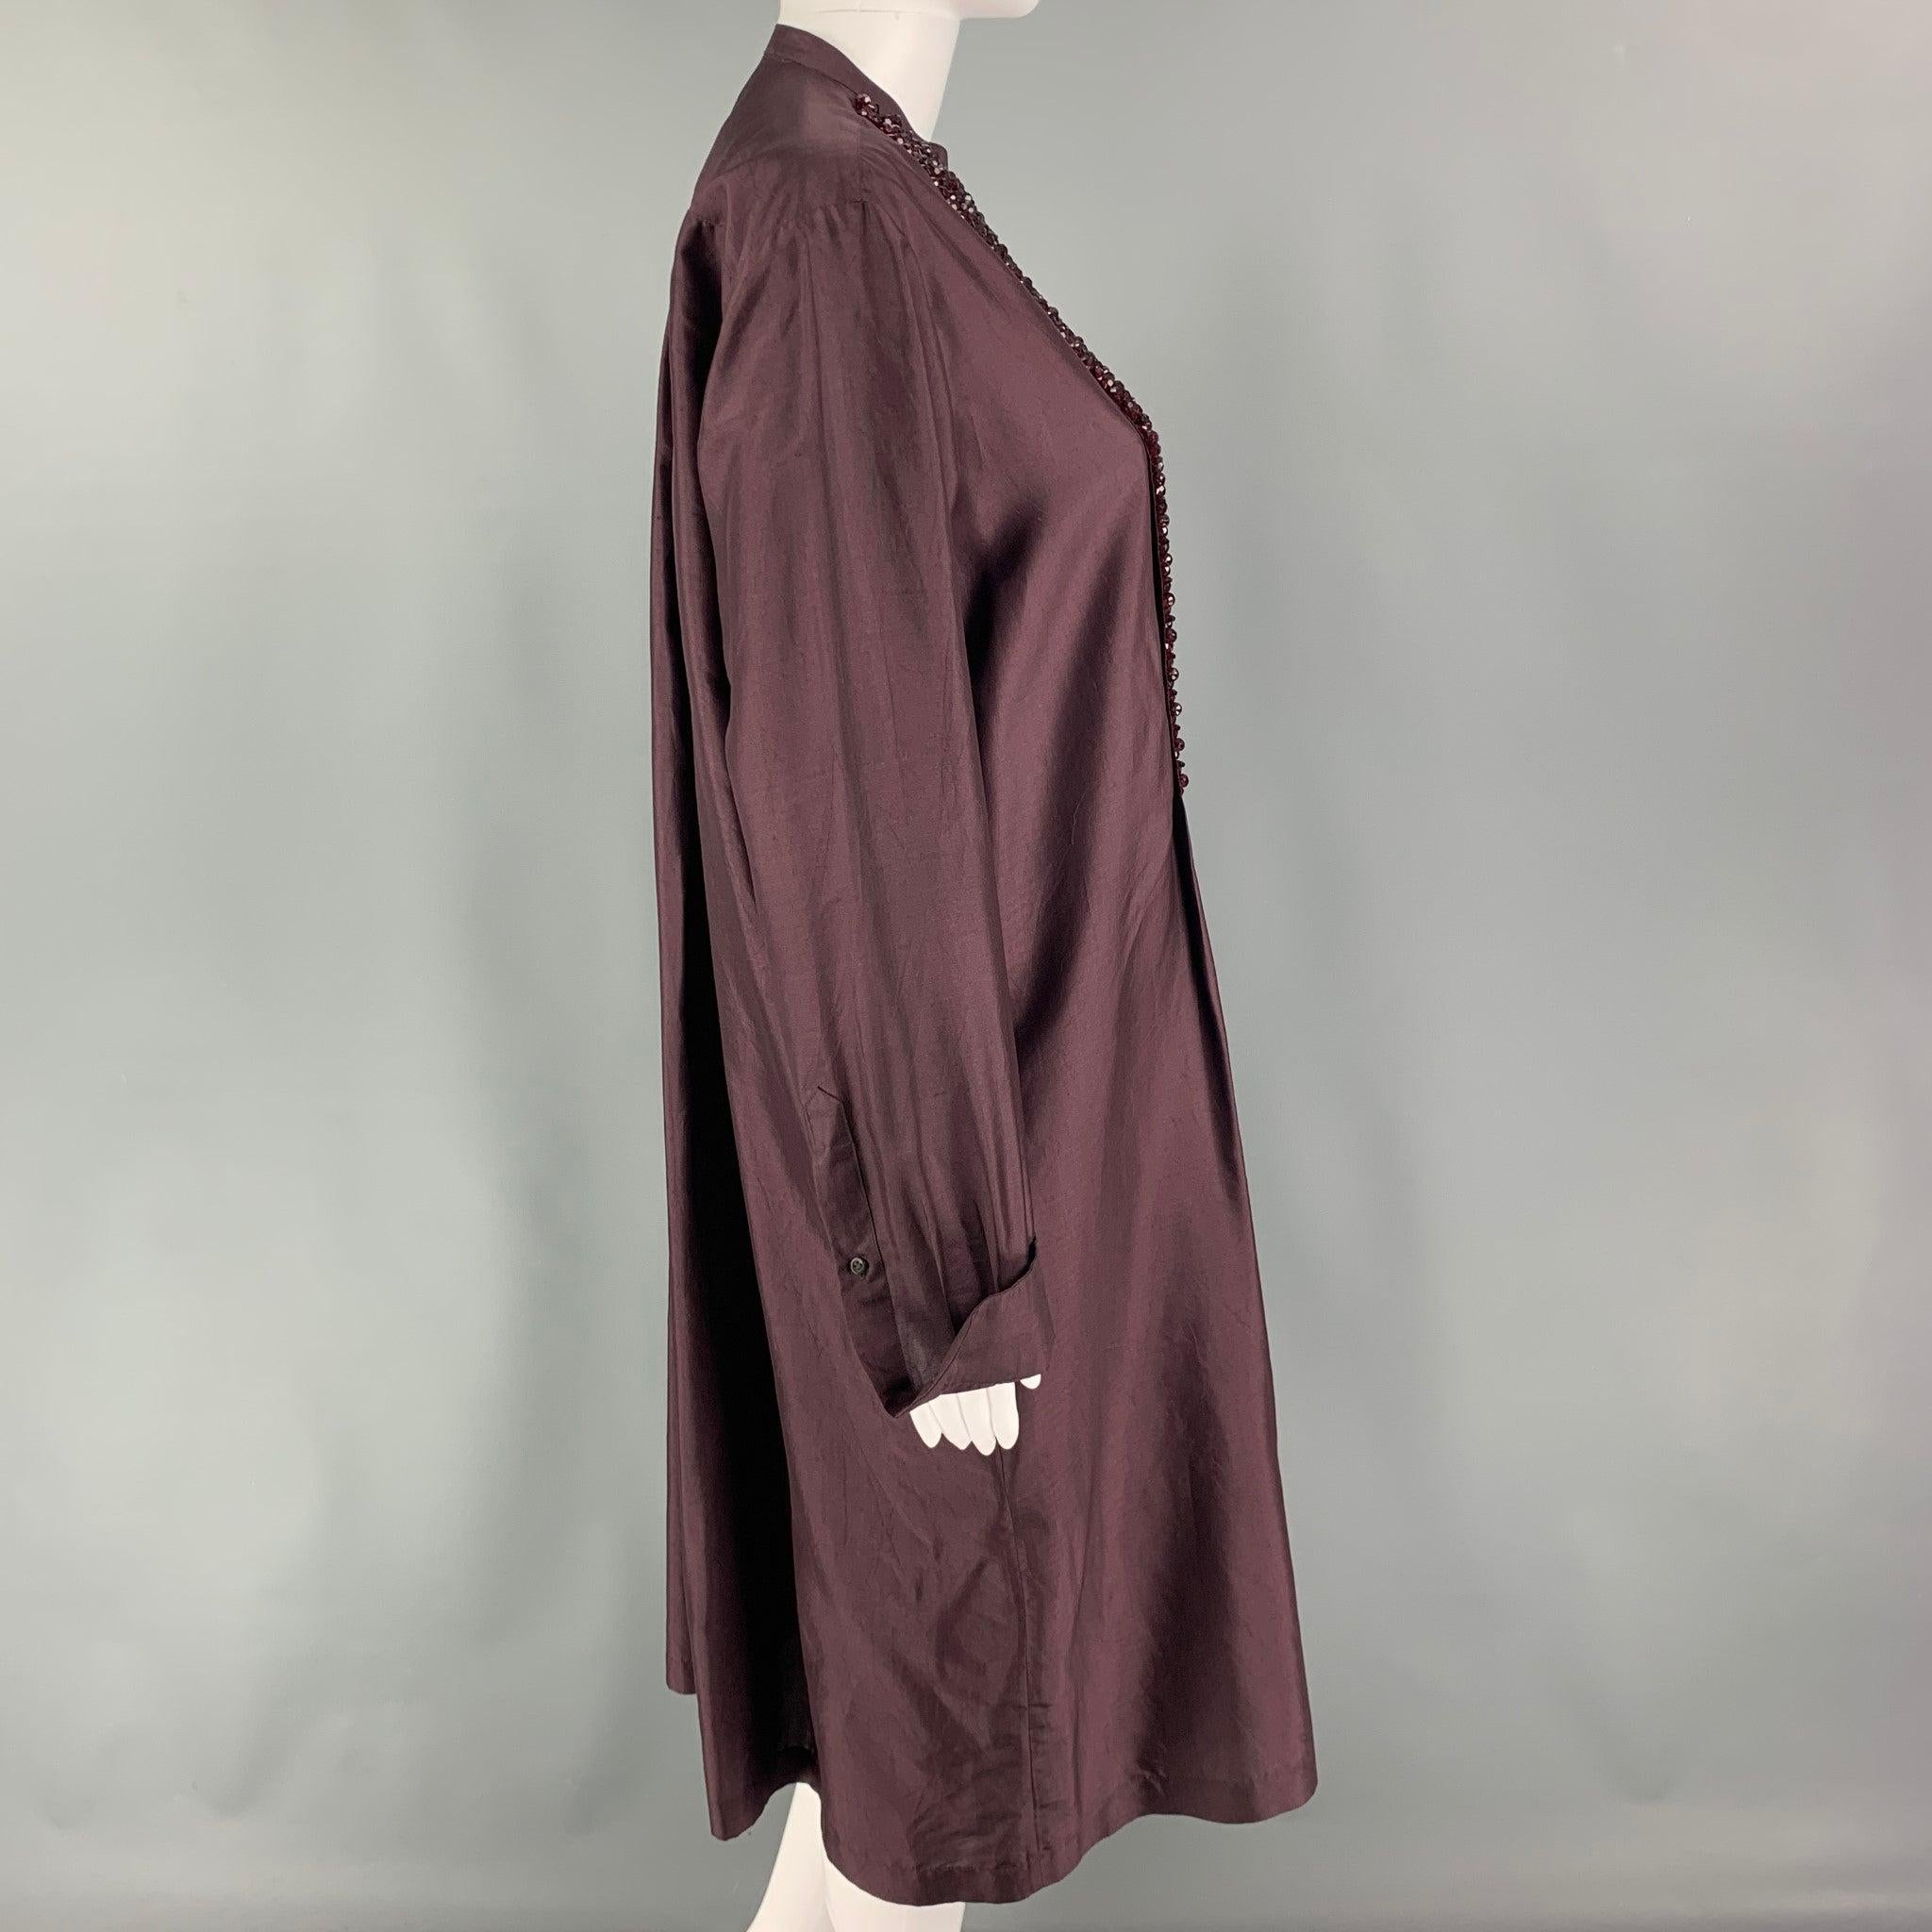 DRIES VAN NOTEN Size 4 Burgundy Silk Beaded Tunic Dress In Good Condition For Sale In San Francisco, CA